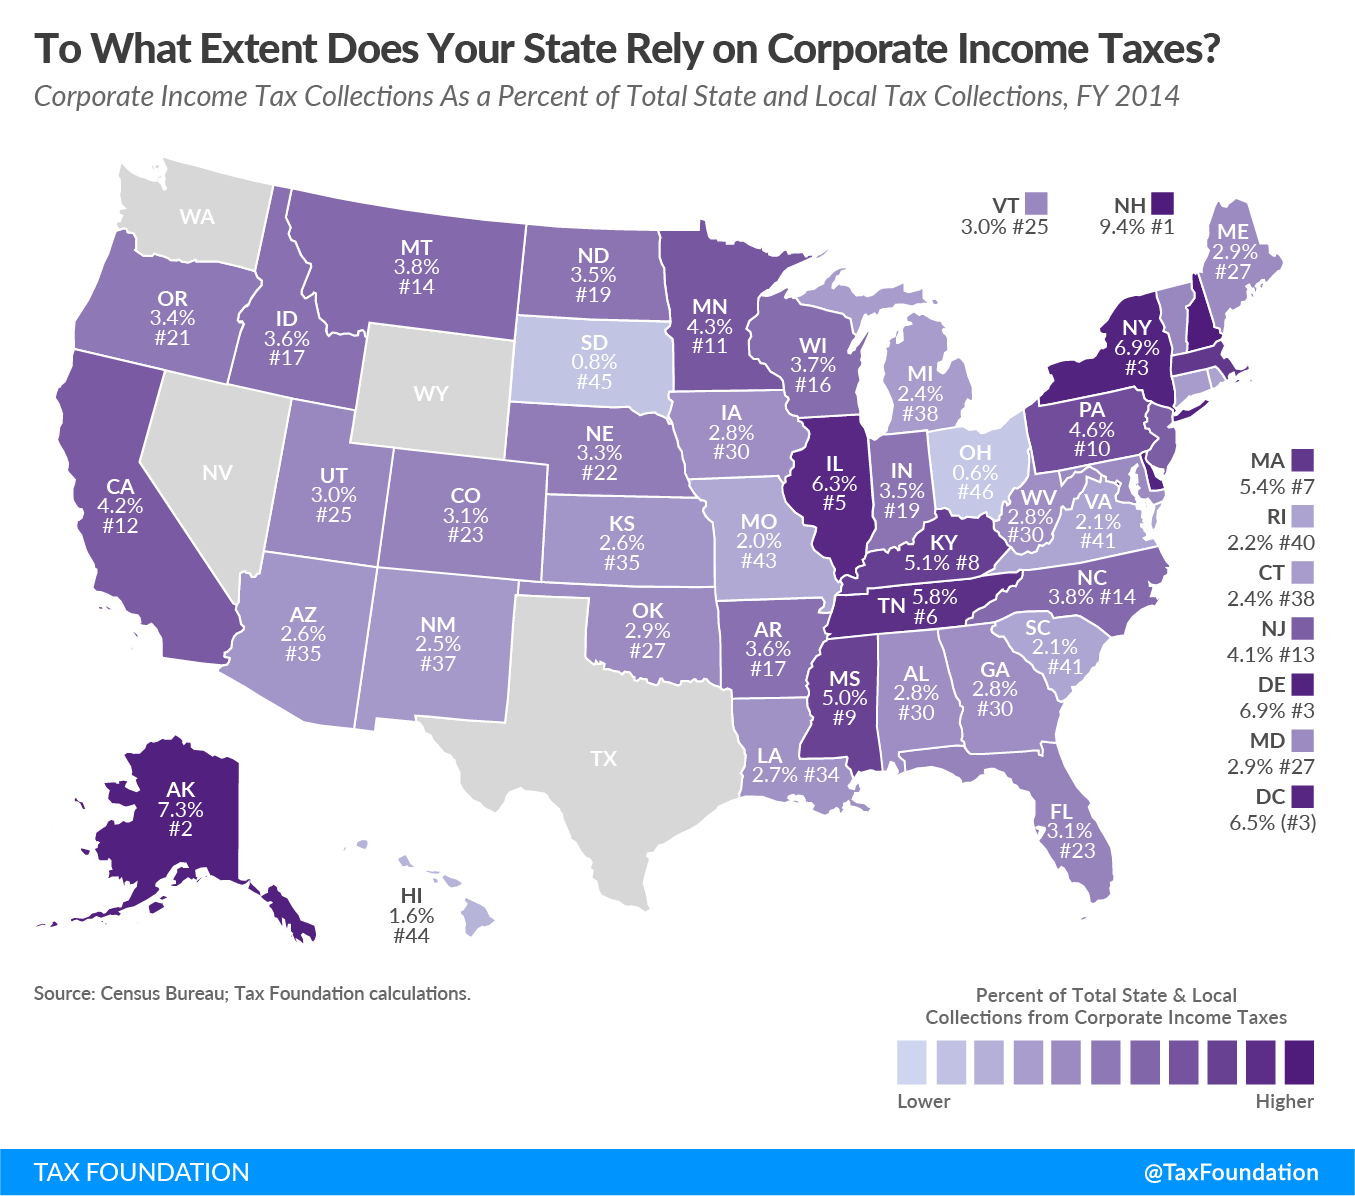 Corporate Income Taxes as a Percentage of State and Local Collections